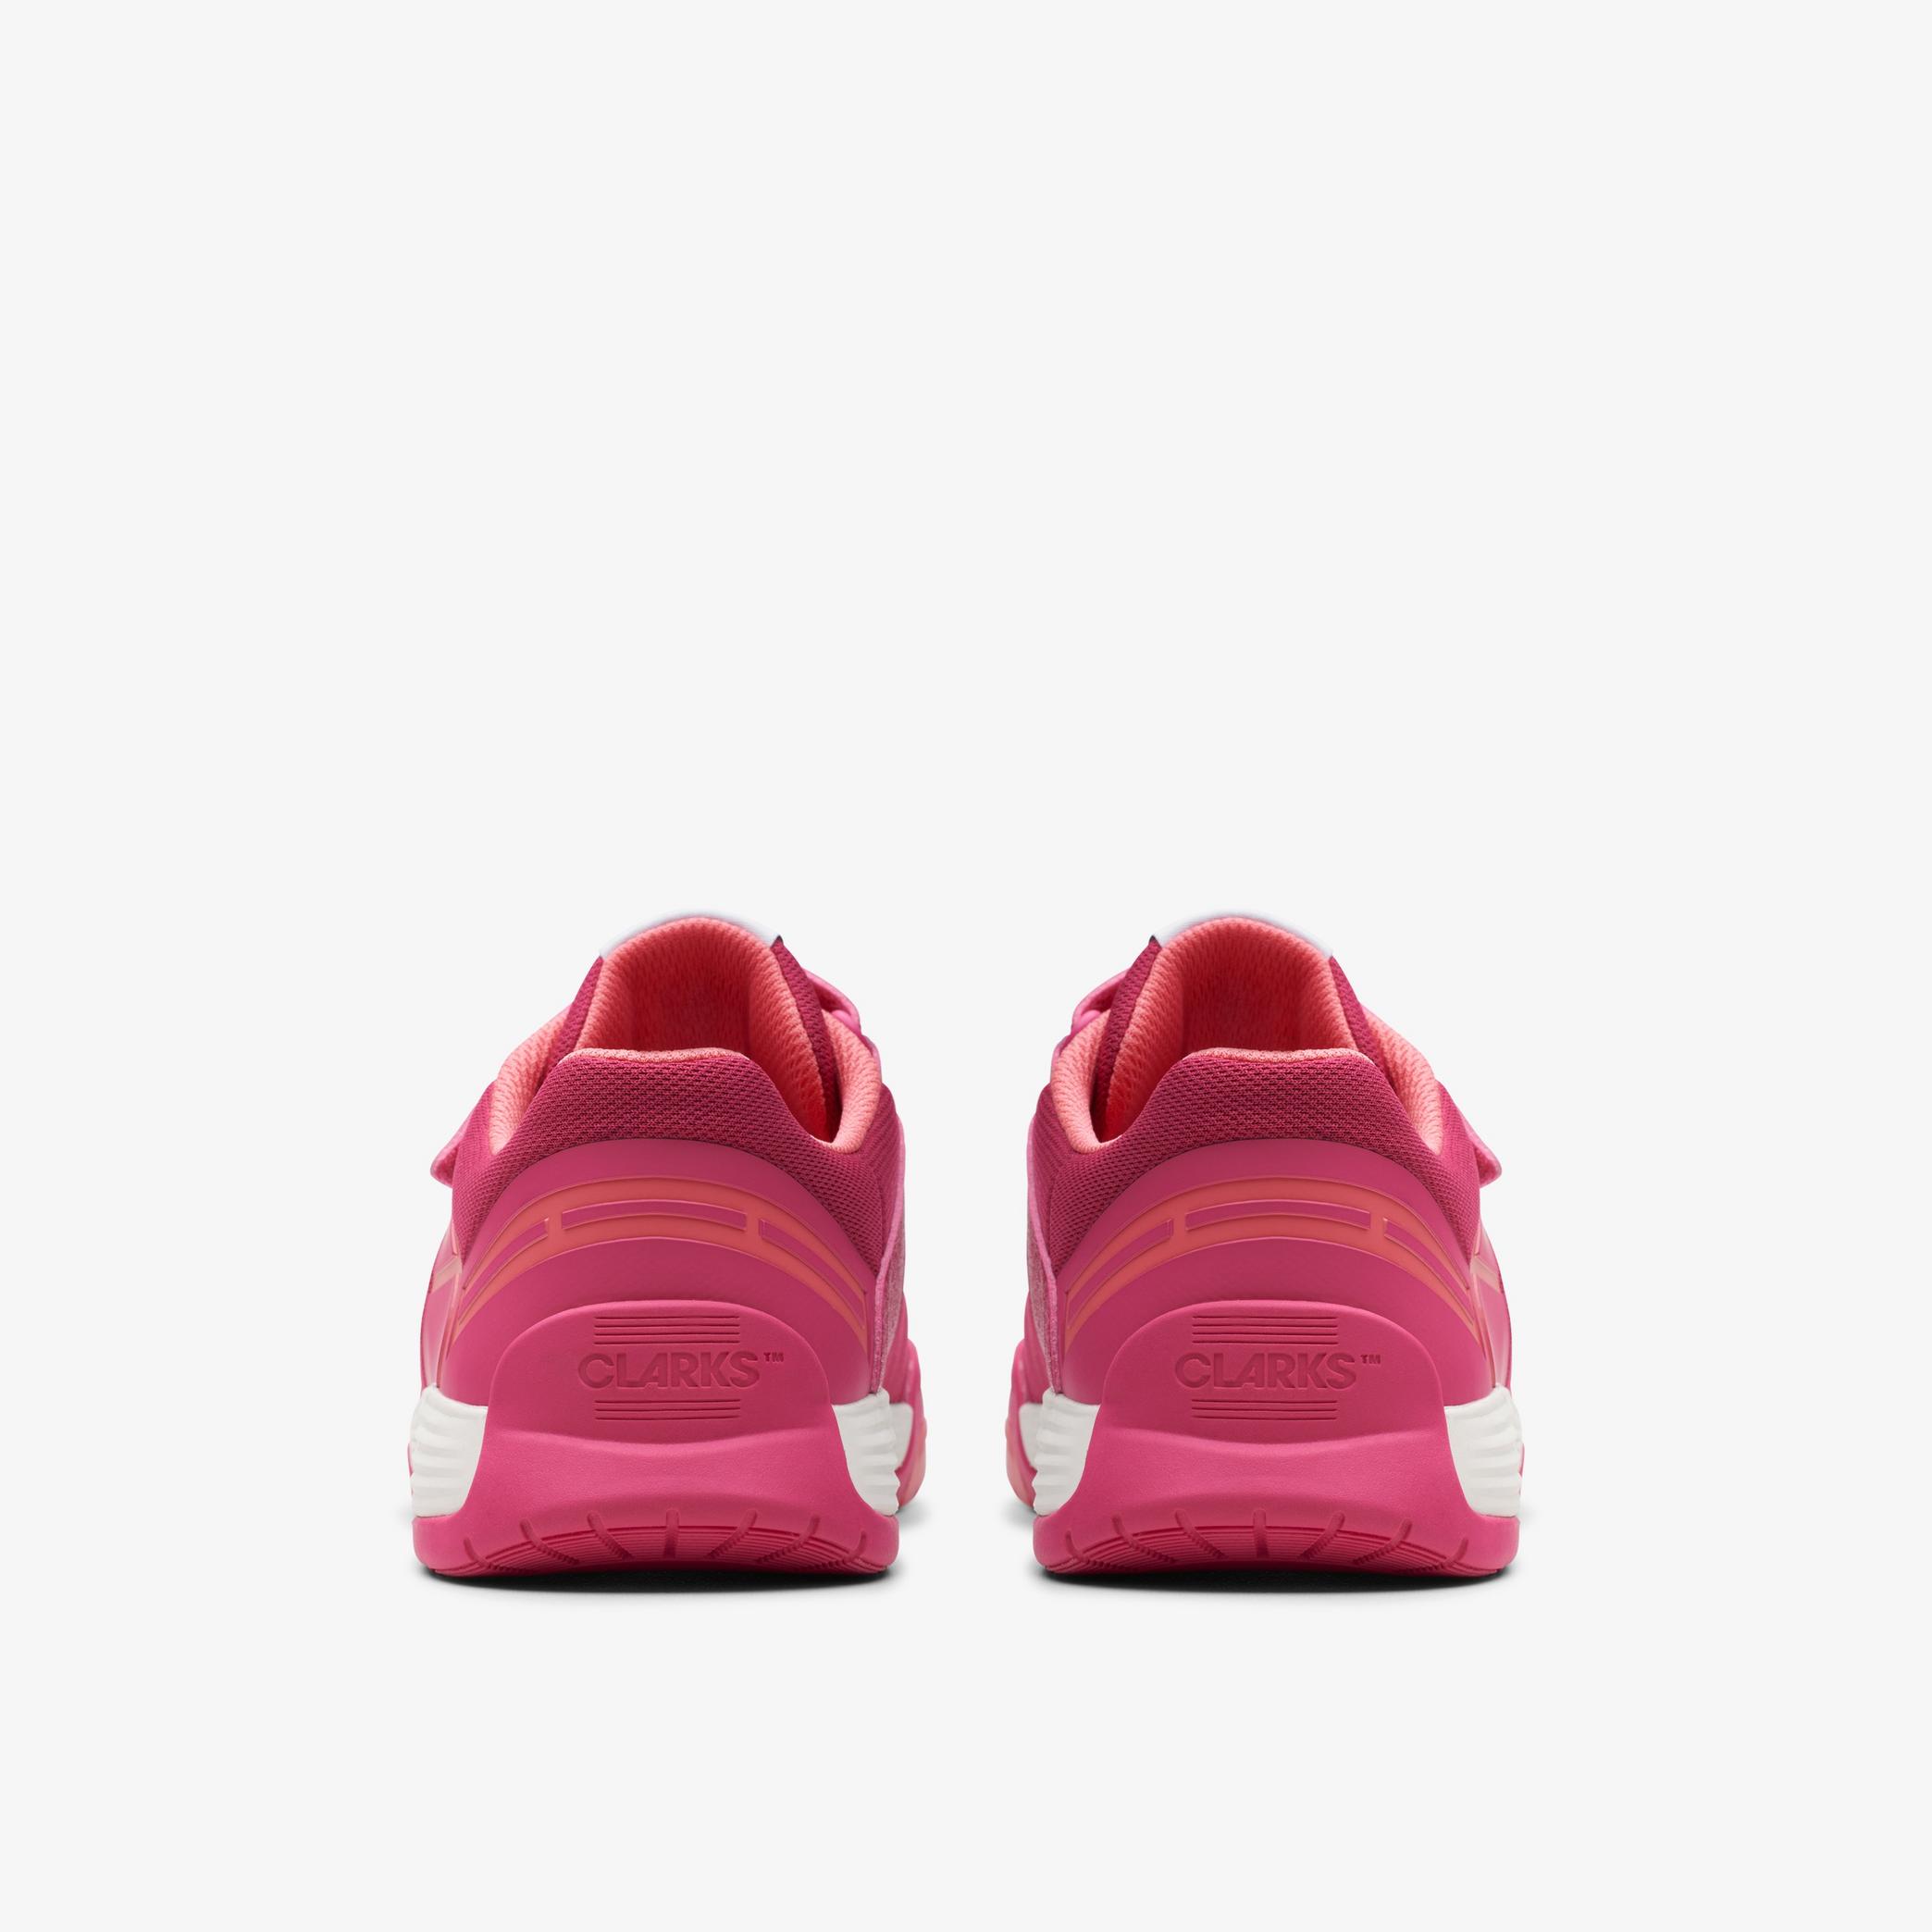 Girls CICA Star Flex Youth Pink Combination Synthetic Trainers | Clarks UK